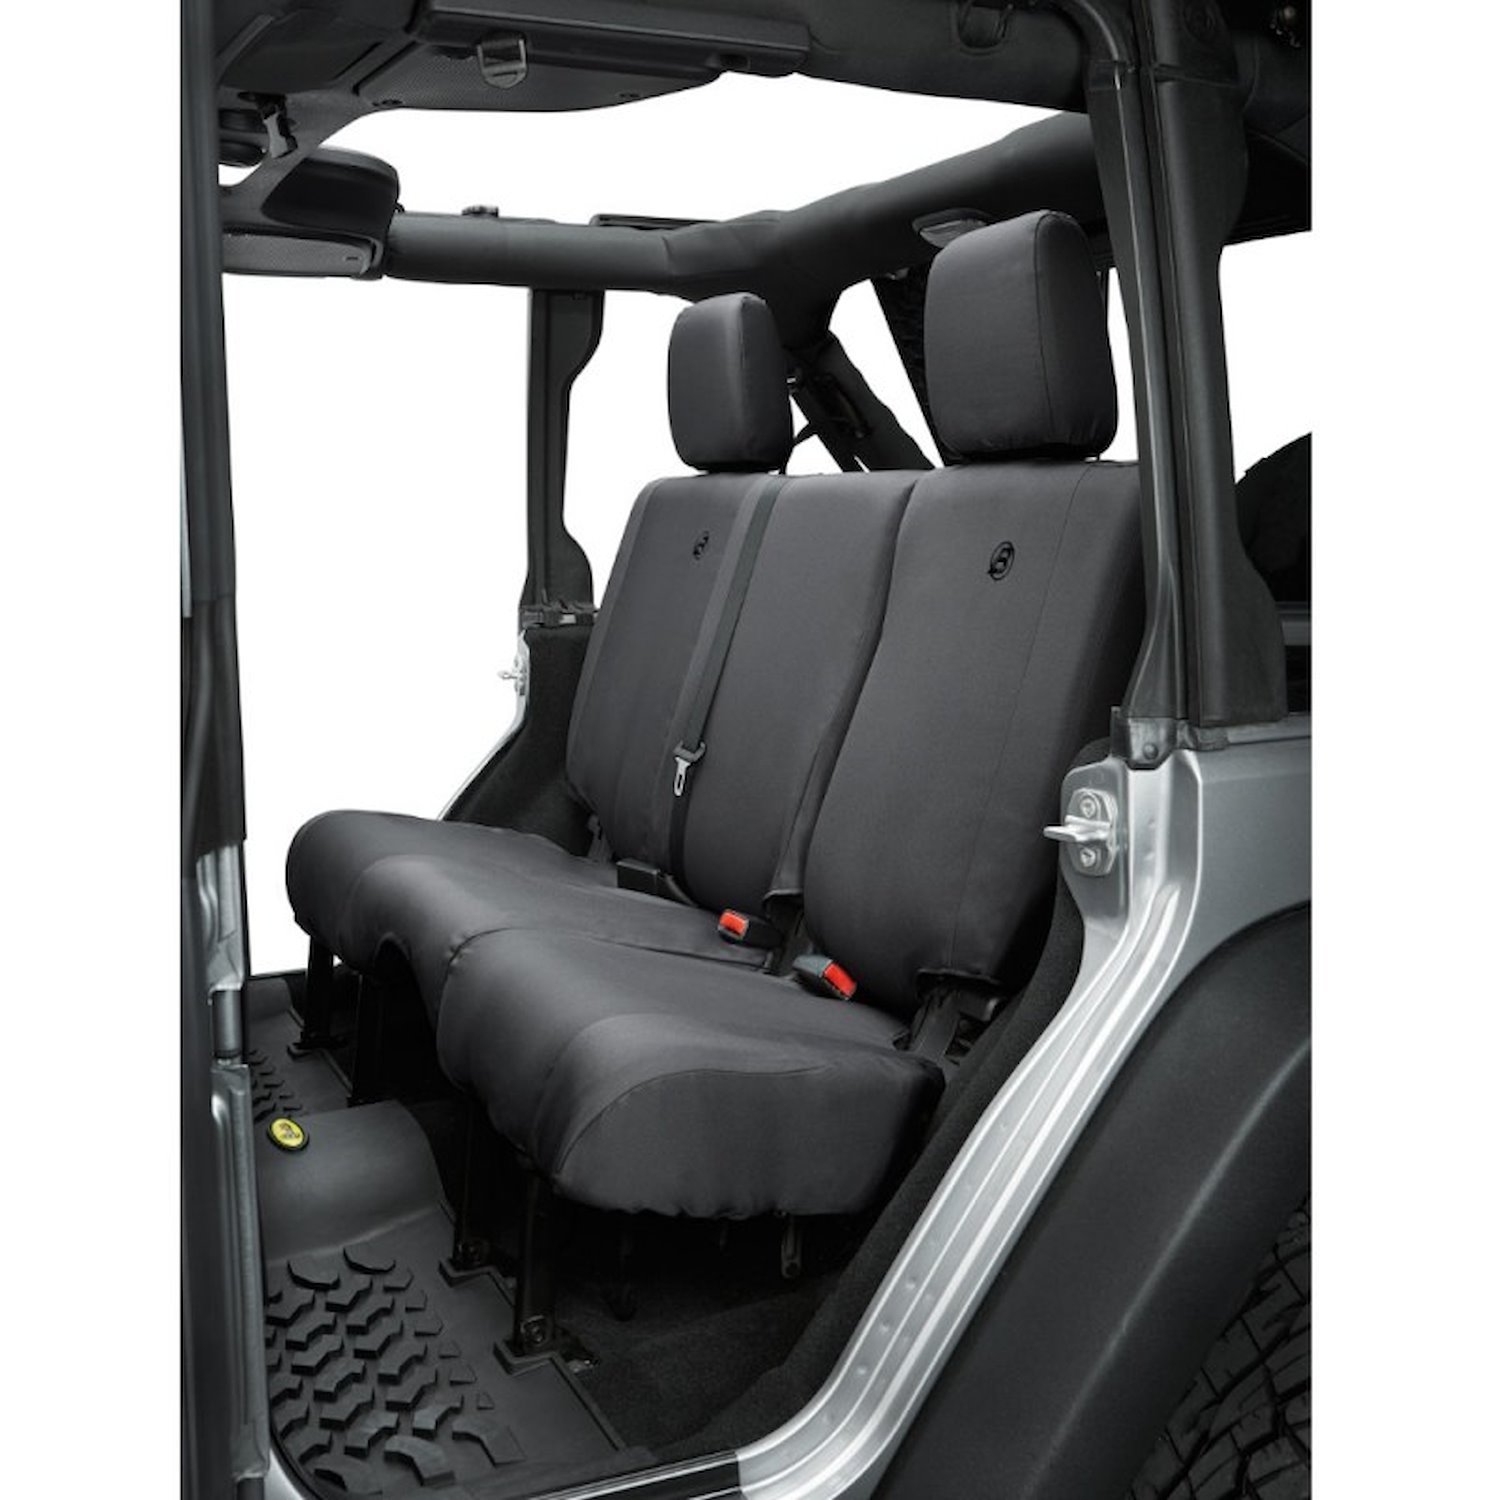 Seat Covers, Black Diamond, Fits Factory Seats, Sold Individually,